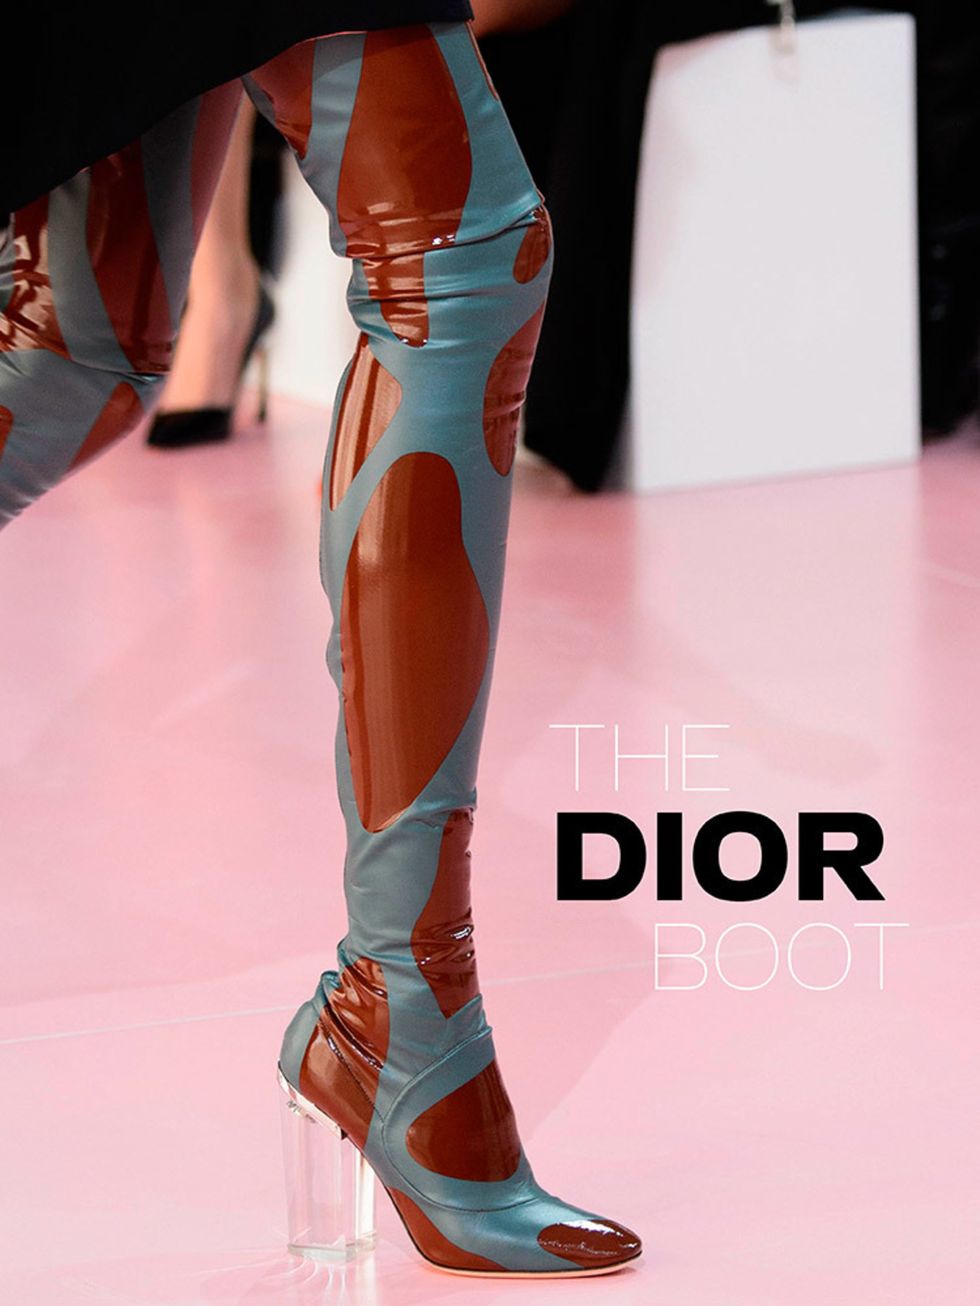 <p>The <a href="http://www.elleuk.com/fashion/news/christian-dior-autumn-winter-2015-paris-fashion-week-review" target="_blank">Dior </a>boot &ndash; It&rsquo;s lacquered, it&rsquo;s skintight, it&rsquo;s modern and just pure brilliant. Buy fashion&rsquo;